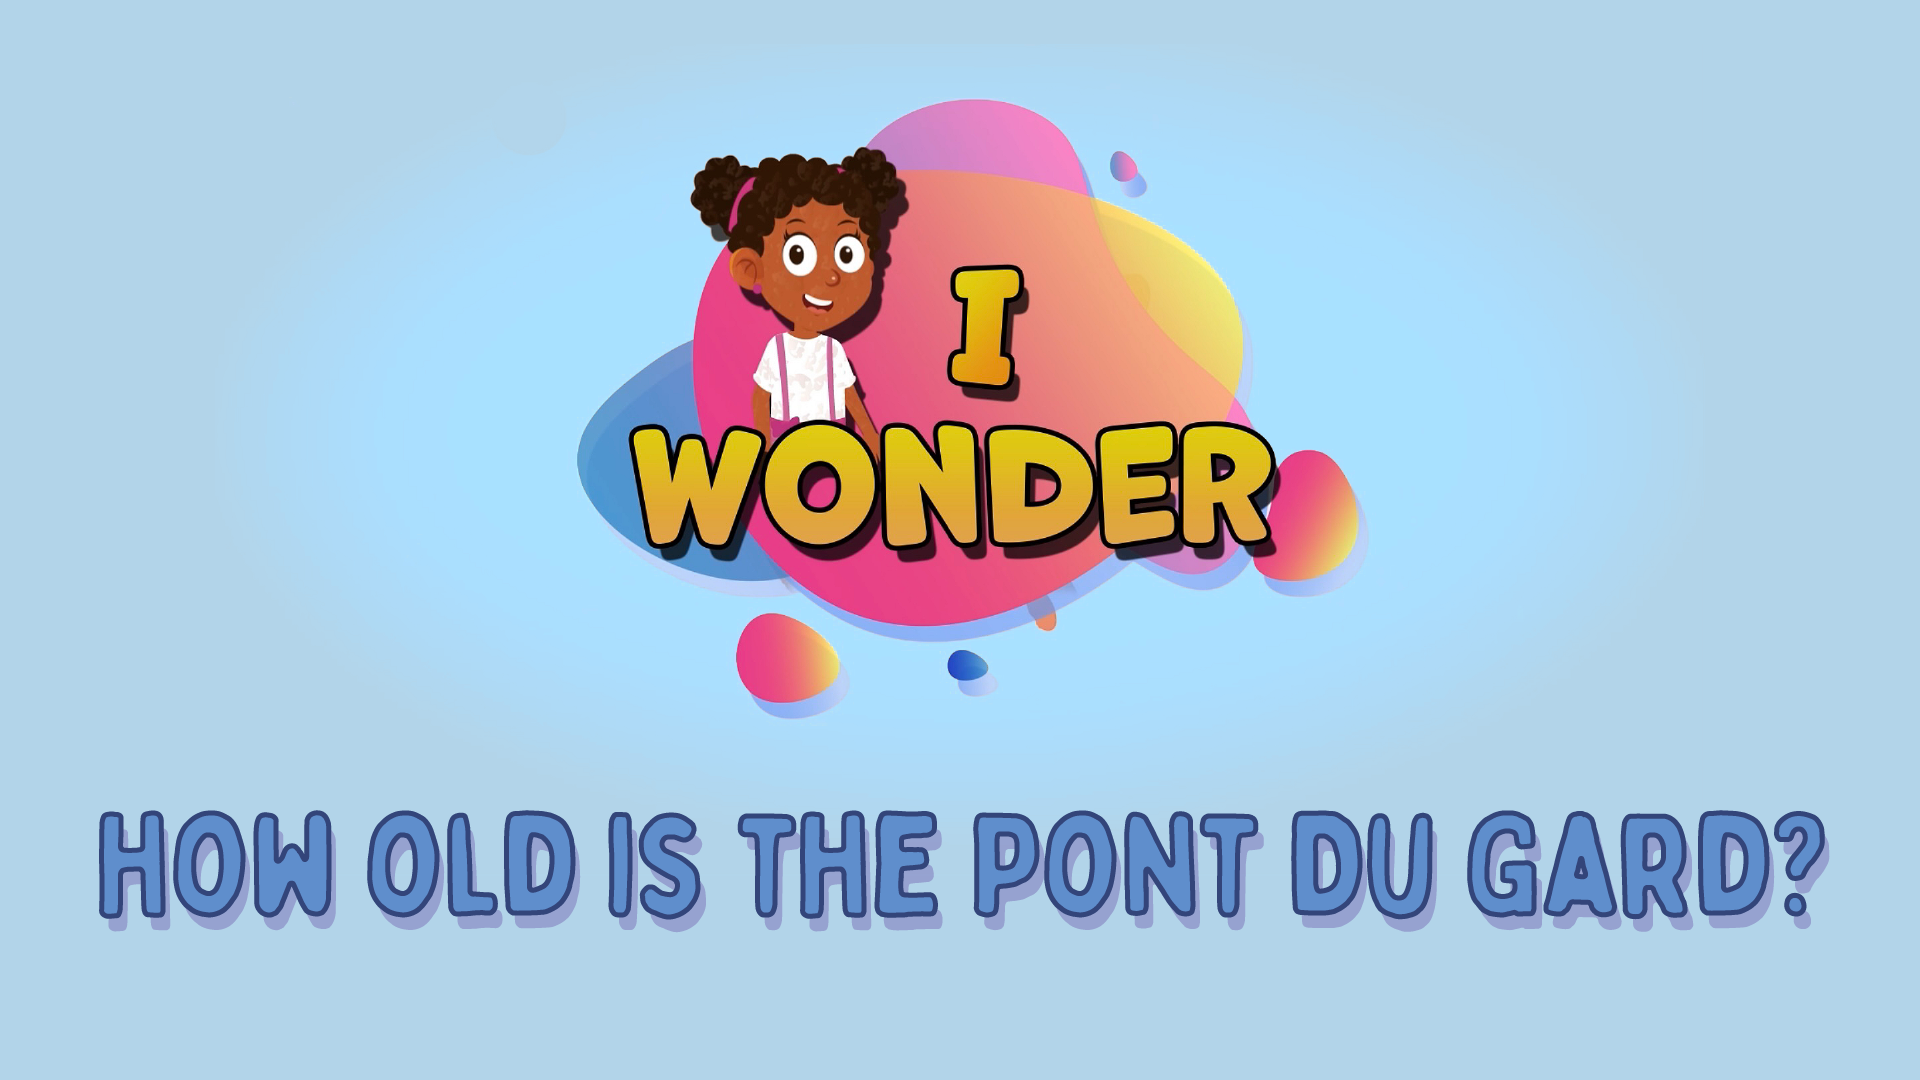 How Old Is The Pont Du Gard?